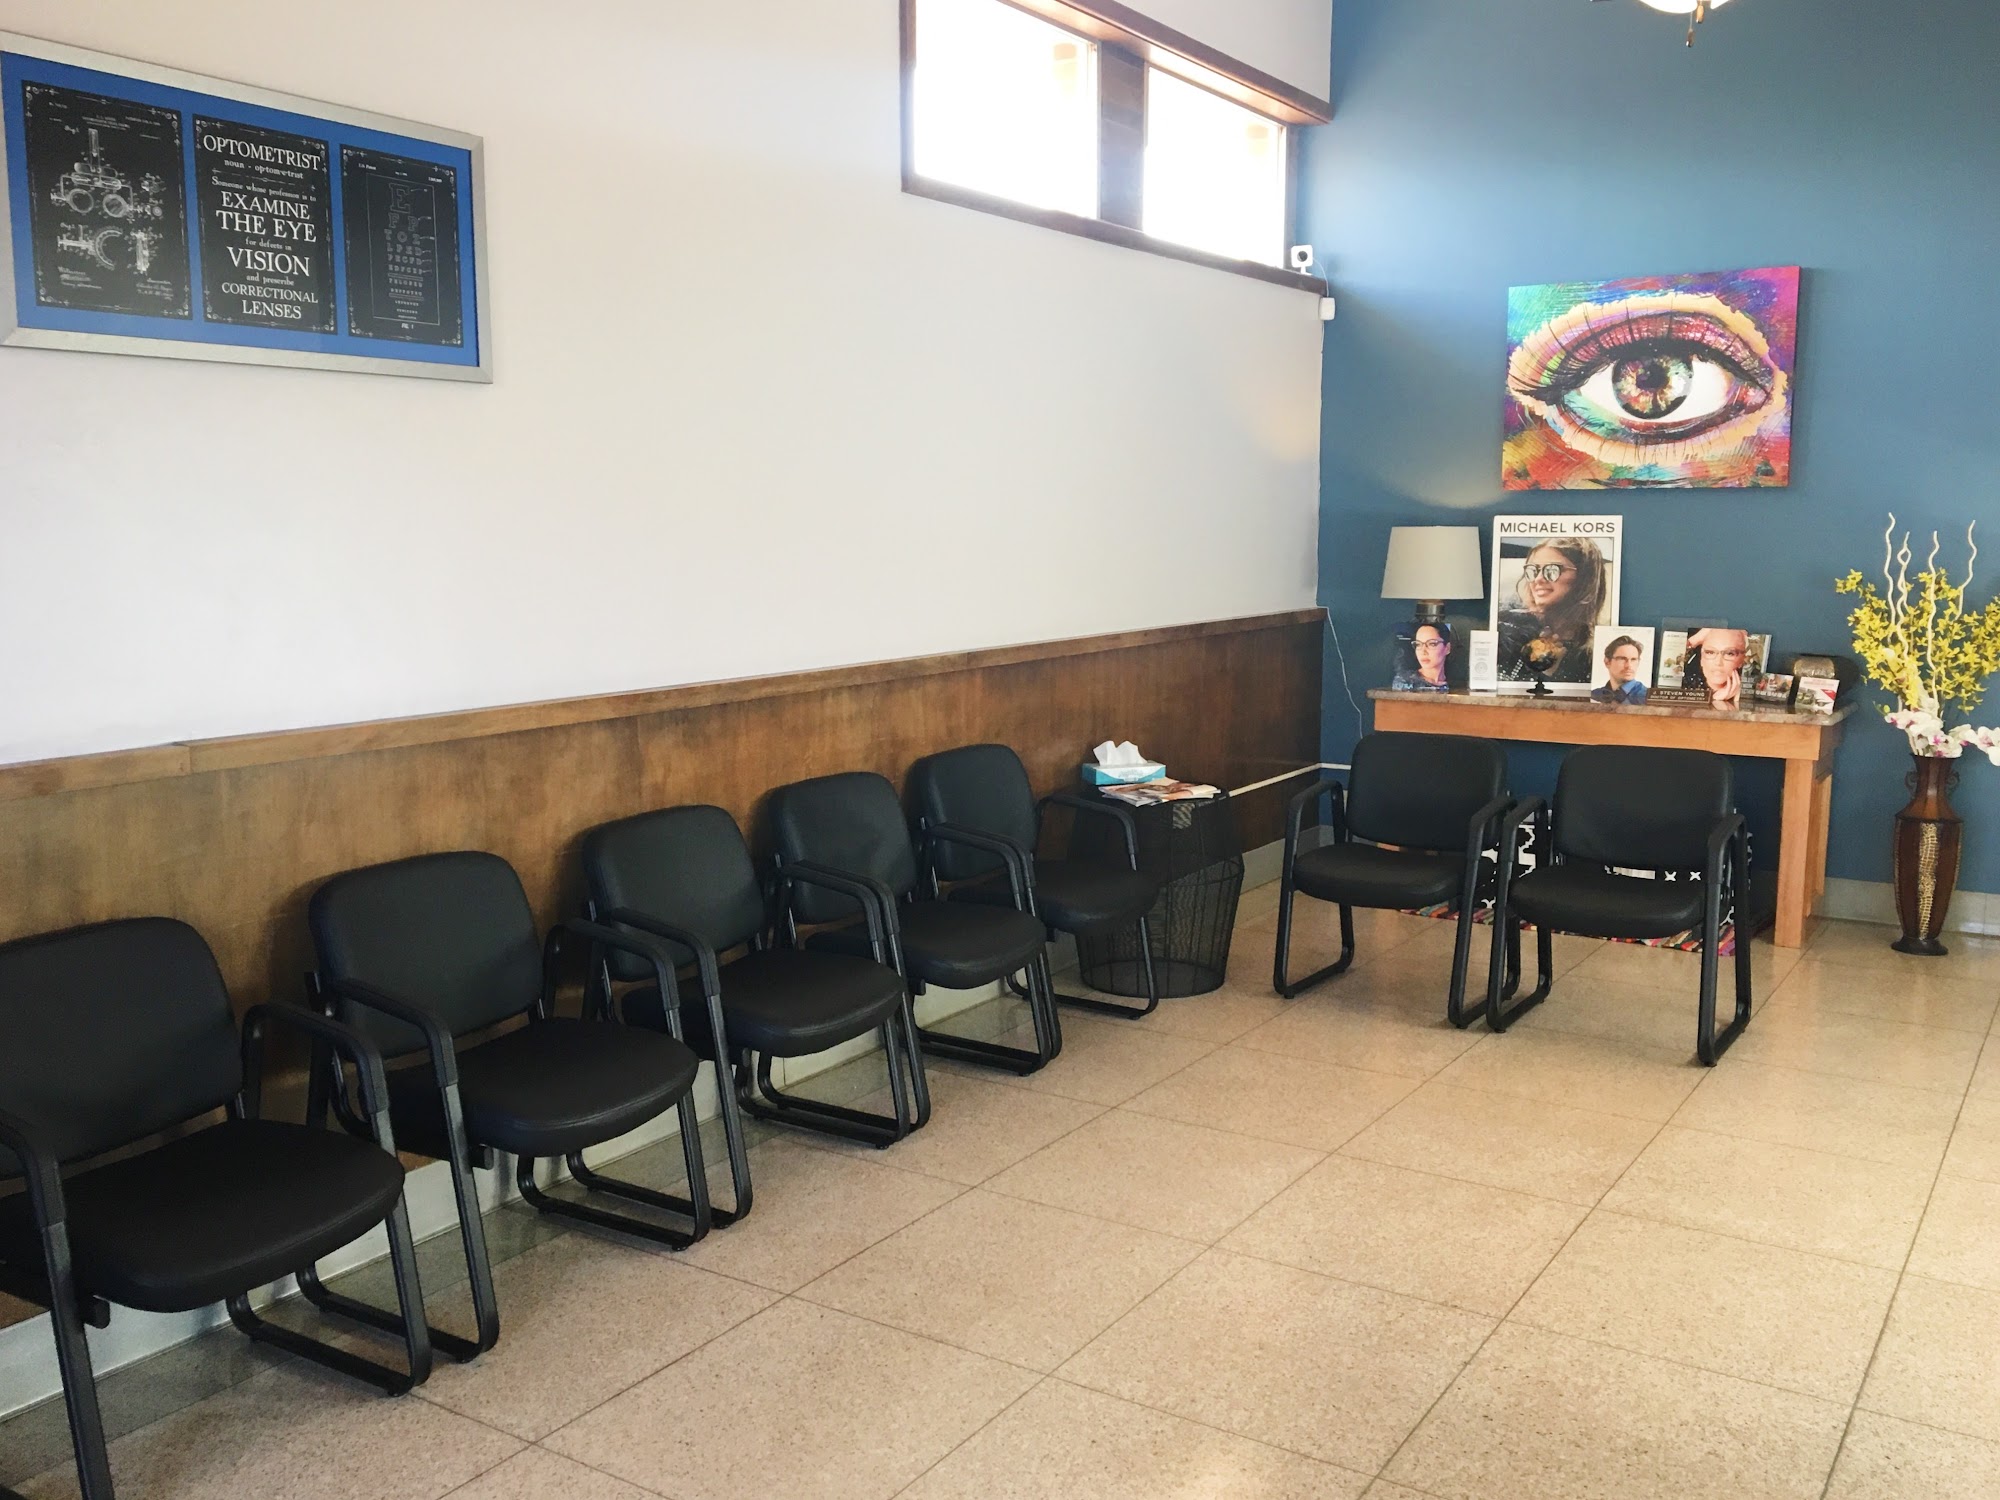 North Texas Eye Care/ Jerry Young OD 201 Commerce St NW, Childress Texas 79201